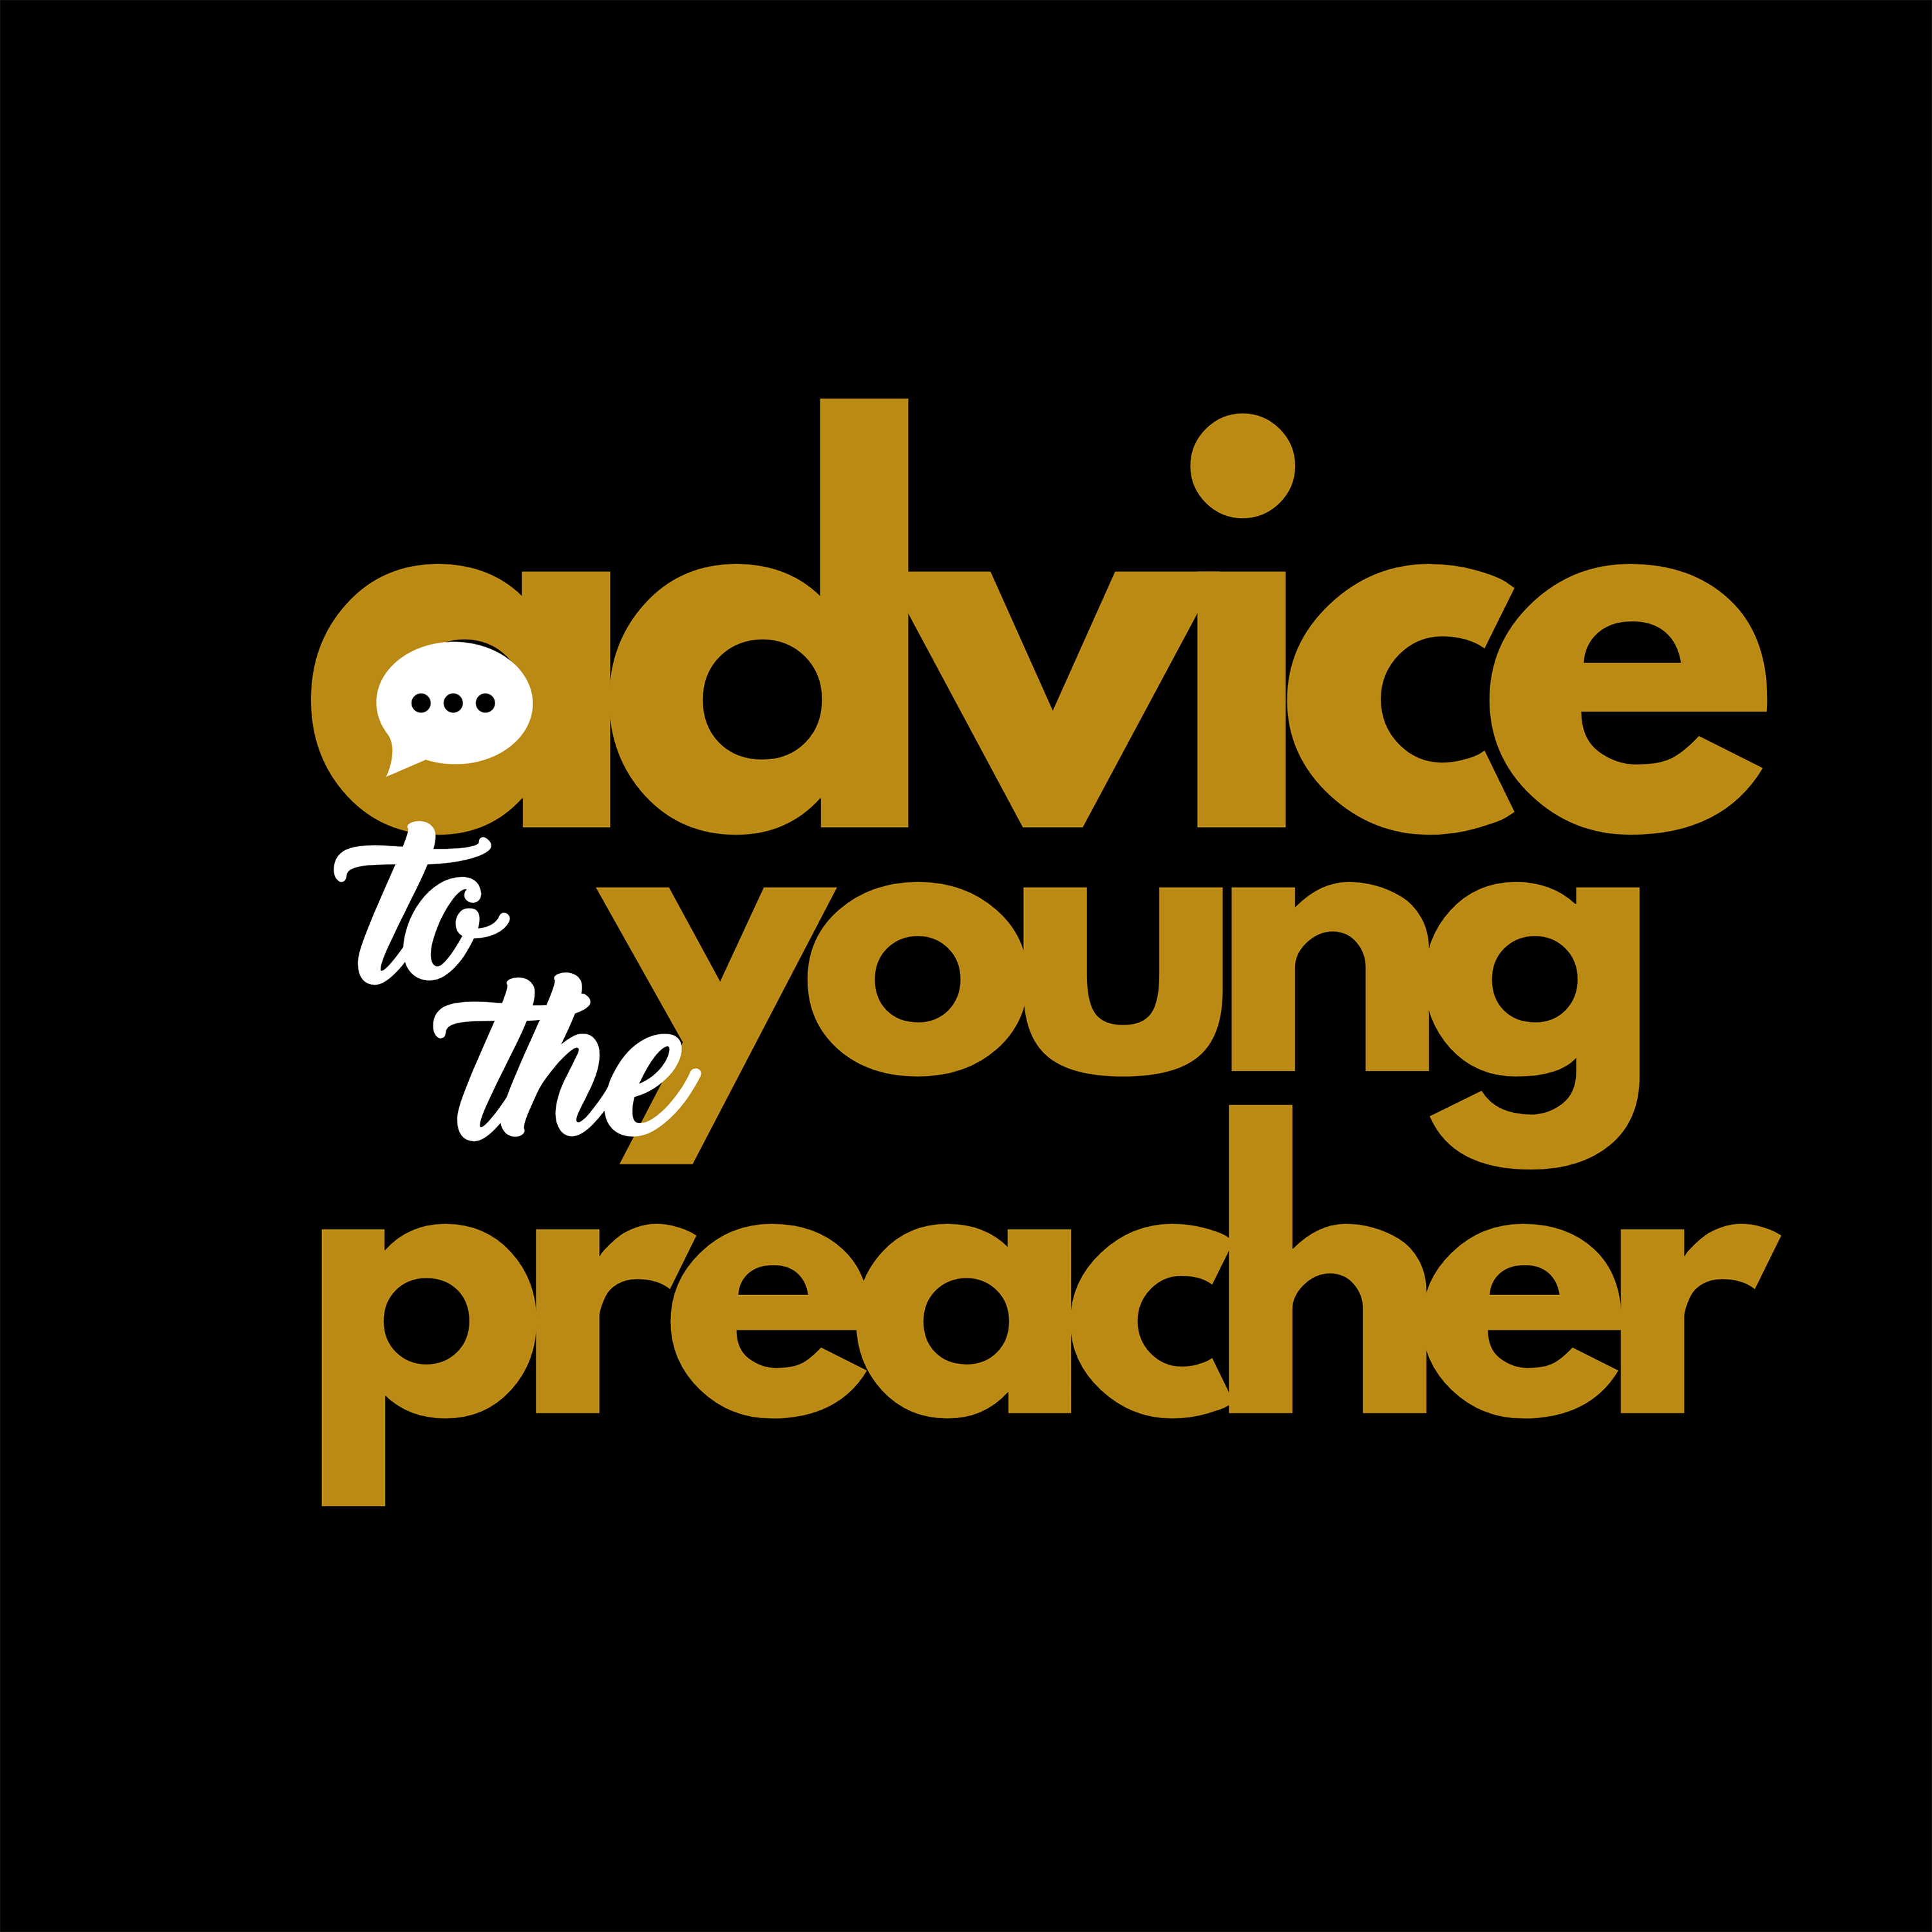 Advice to the Young Preacher